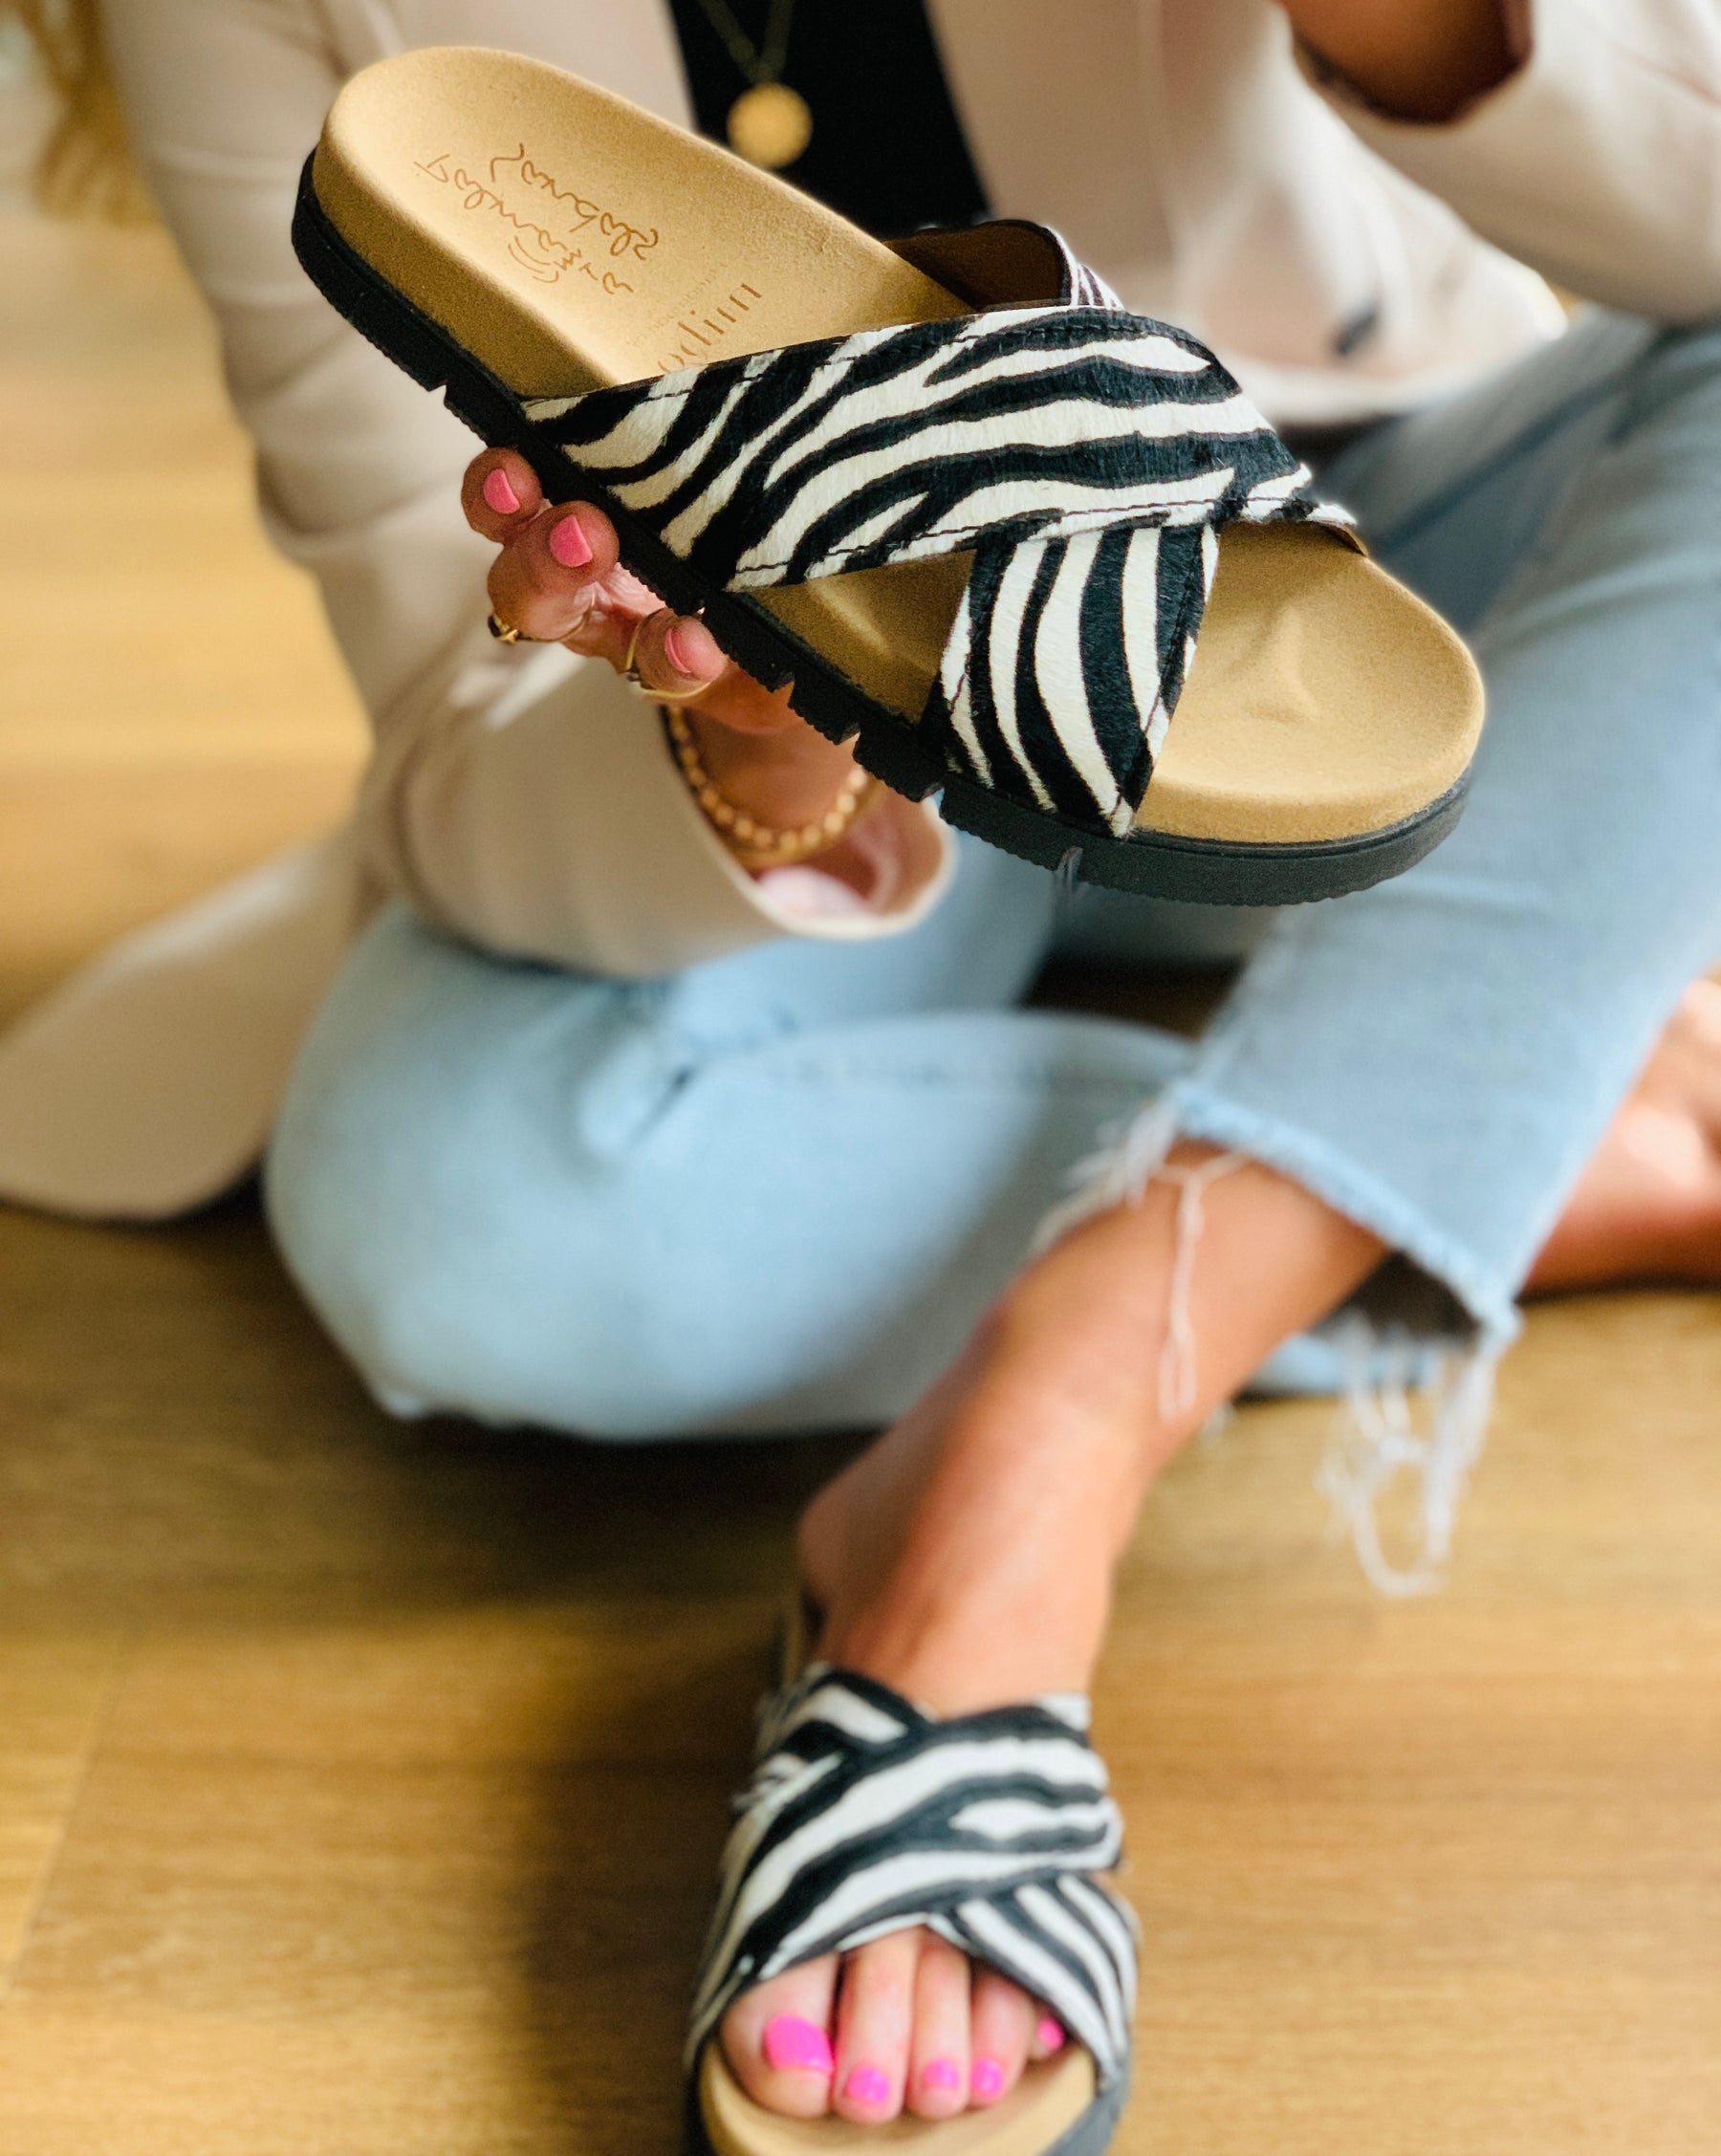 zebra print hair-on leather crossover slide with an ergonomic sole for added arch support